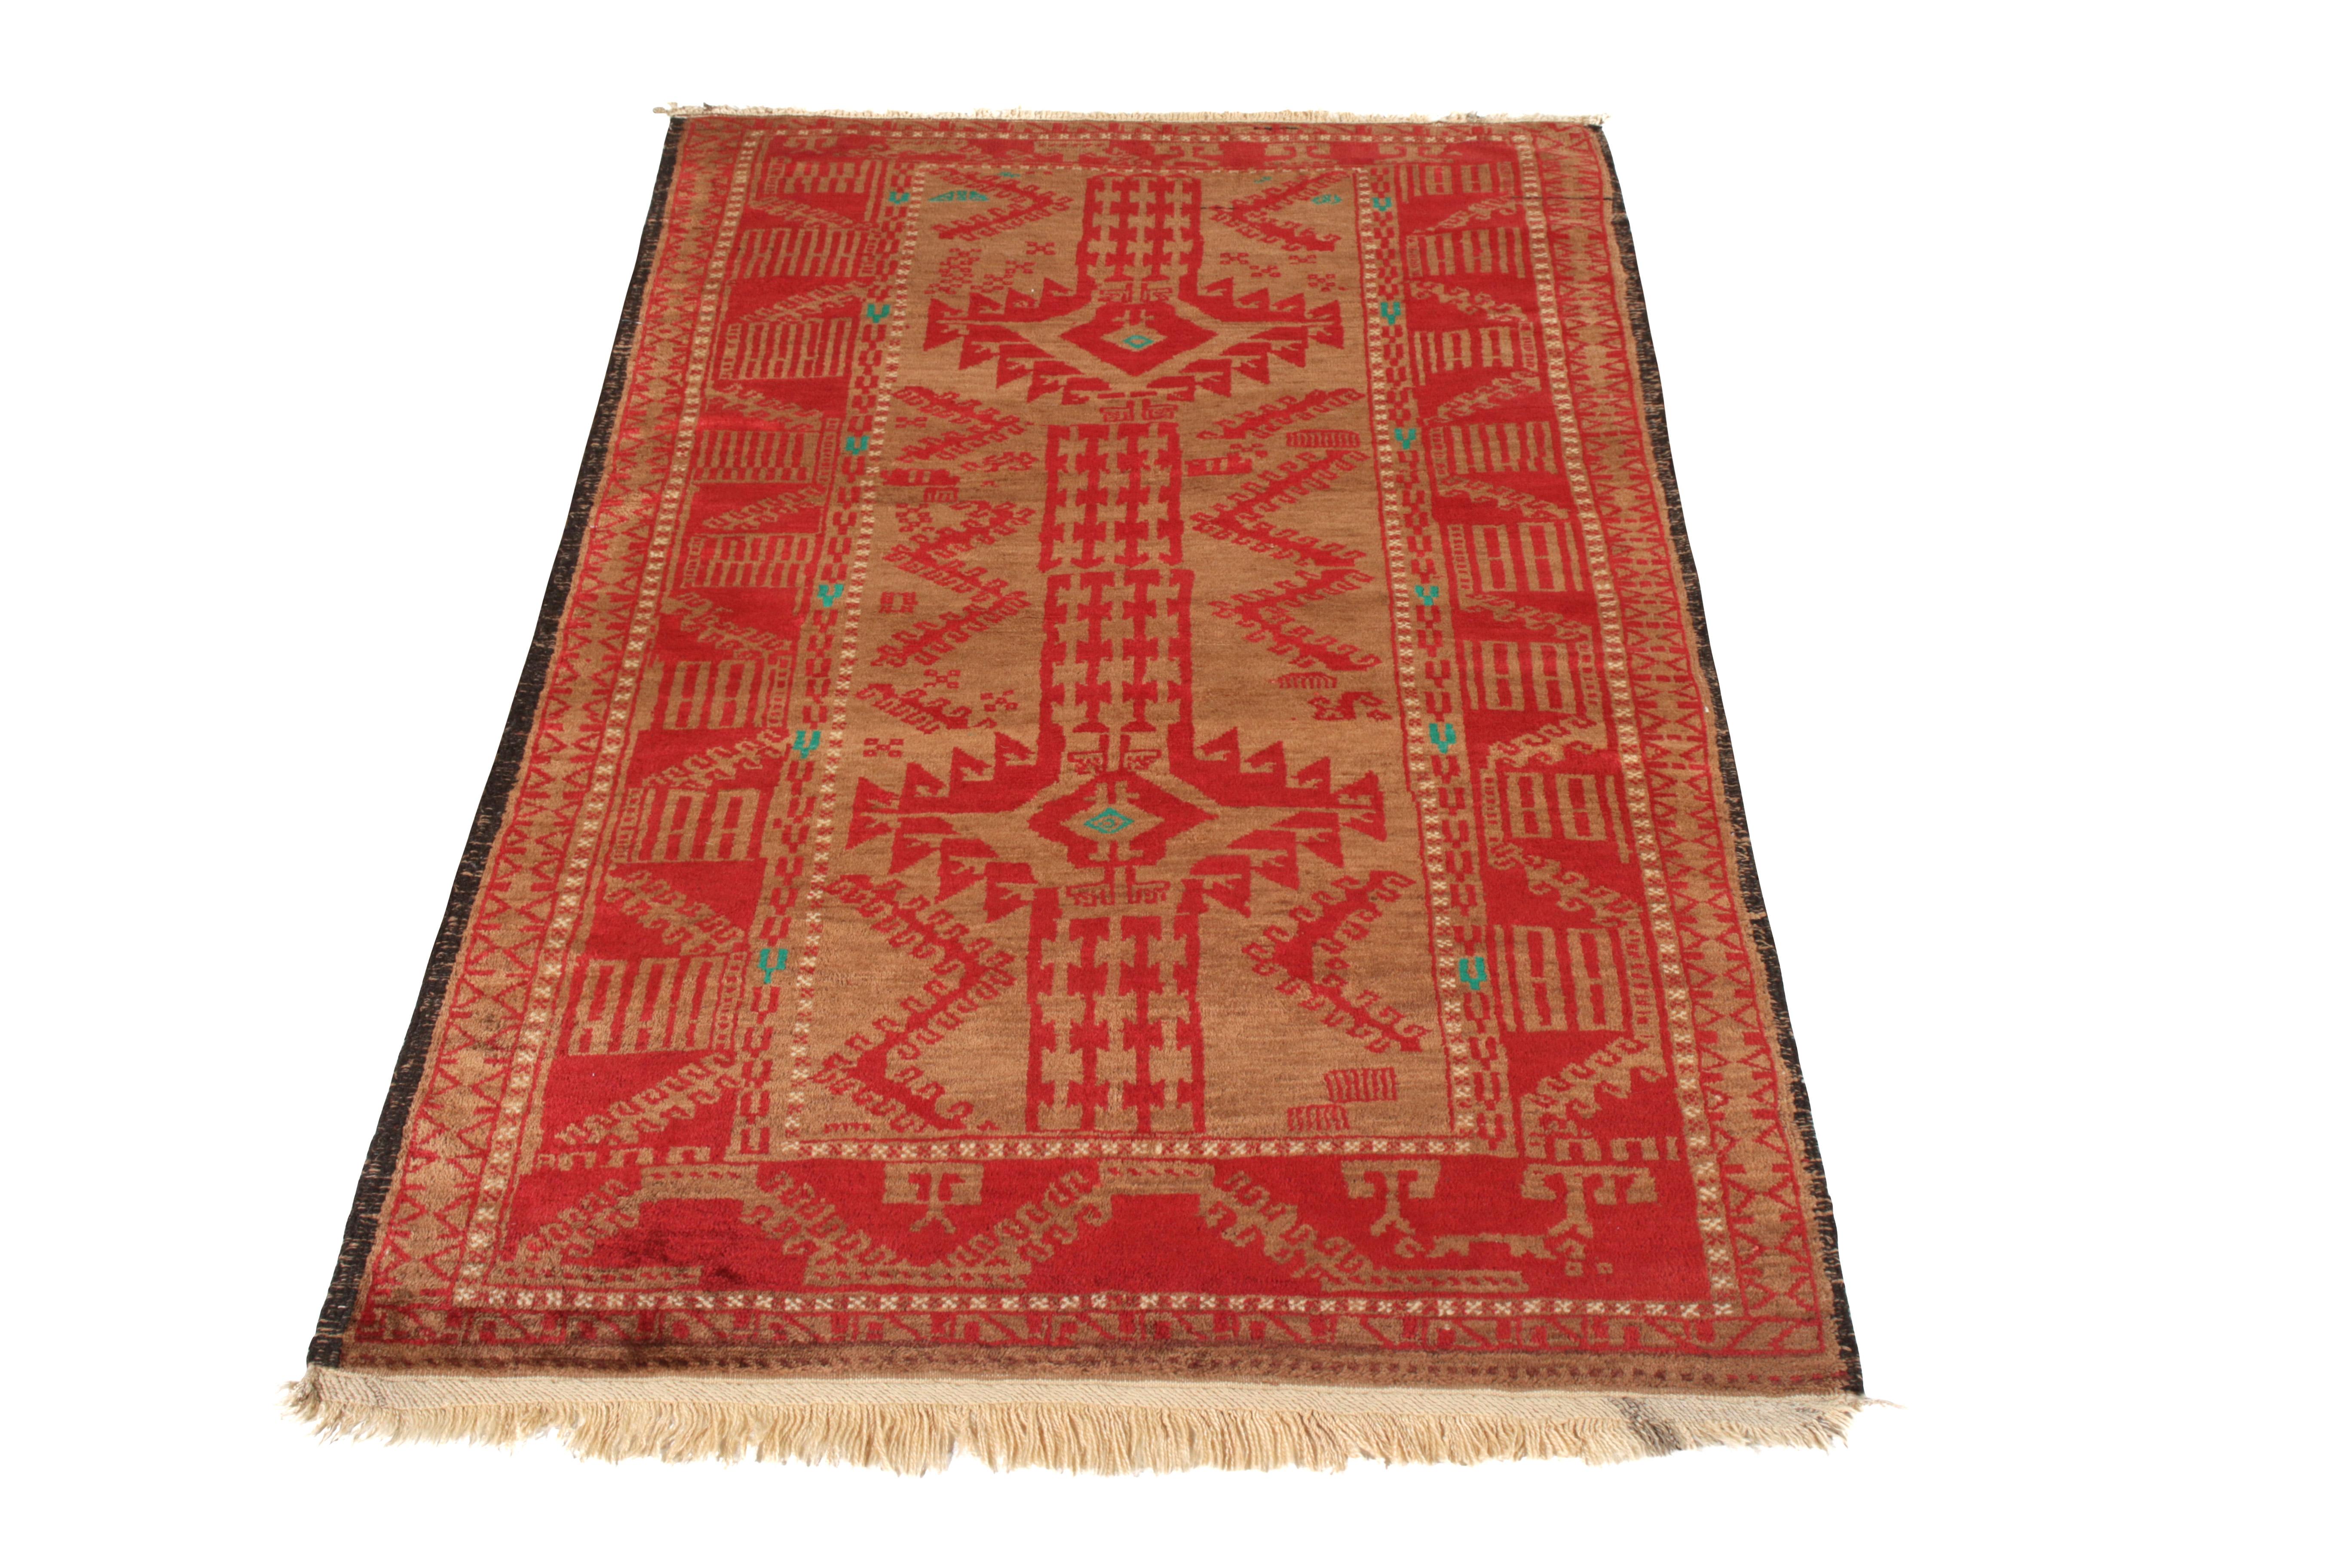 Hand-knotted in wool originating circa 1890-1900, this antique Persian rug connotes a transitional Baluch rug design, offering a rich red and beige-brown colorway pallet in a versatile 3x6 size among its cultured and distinctive features enjoyed in